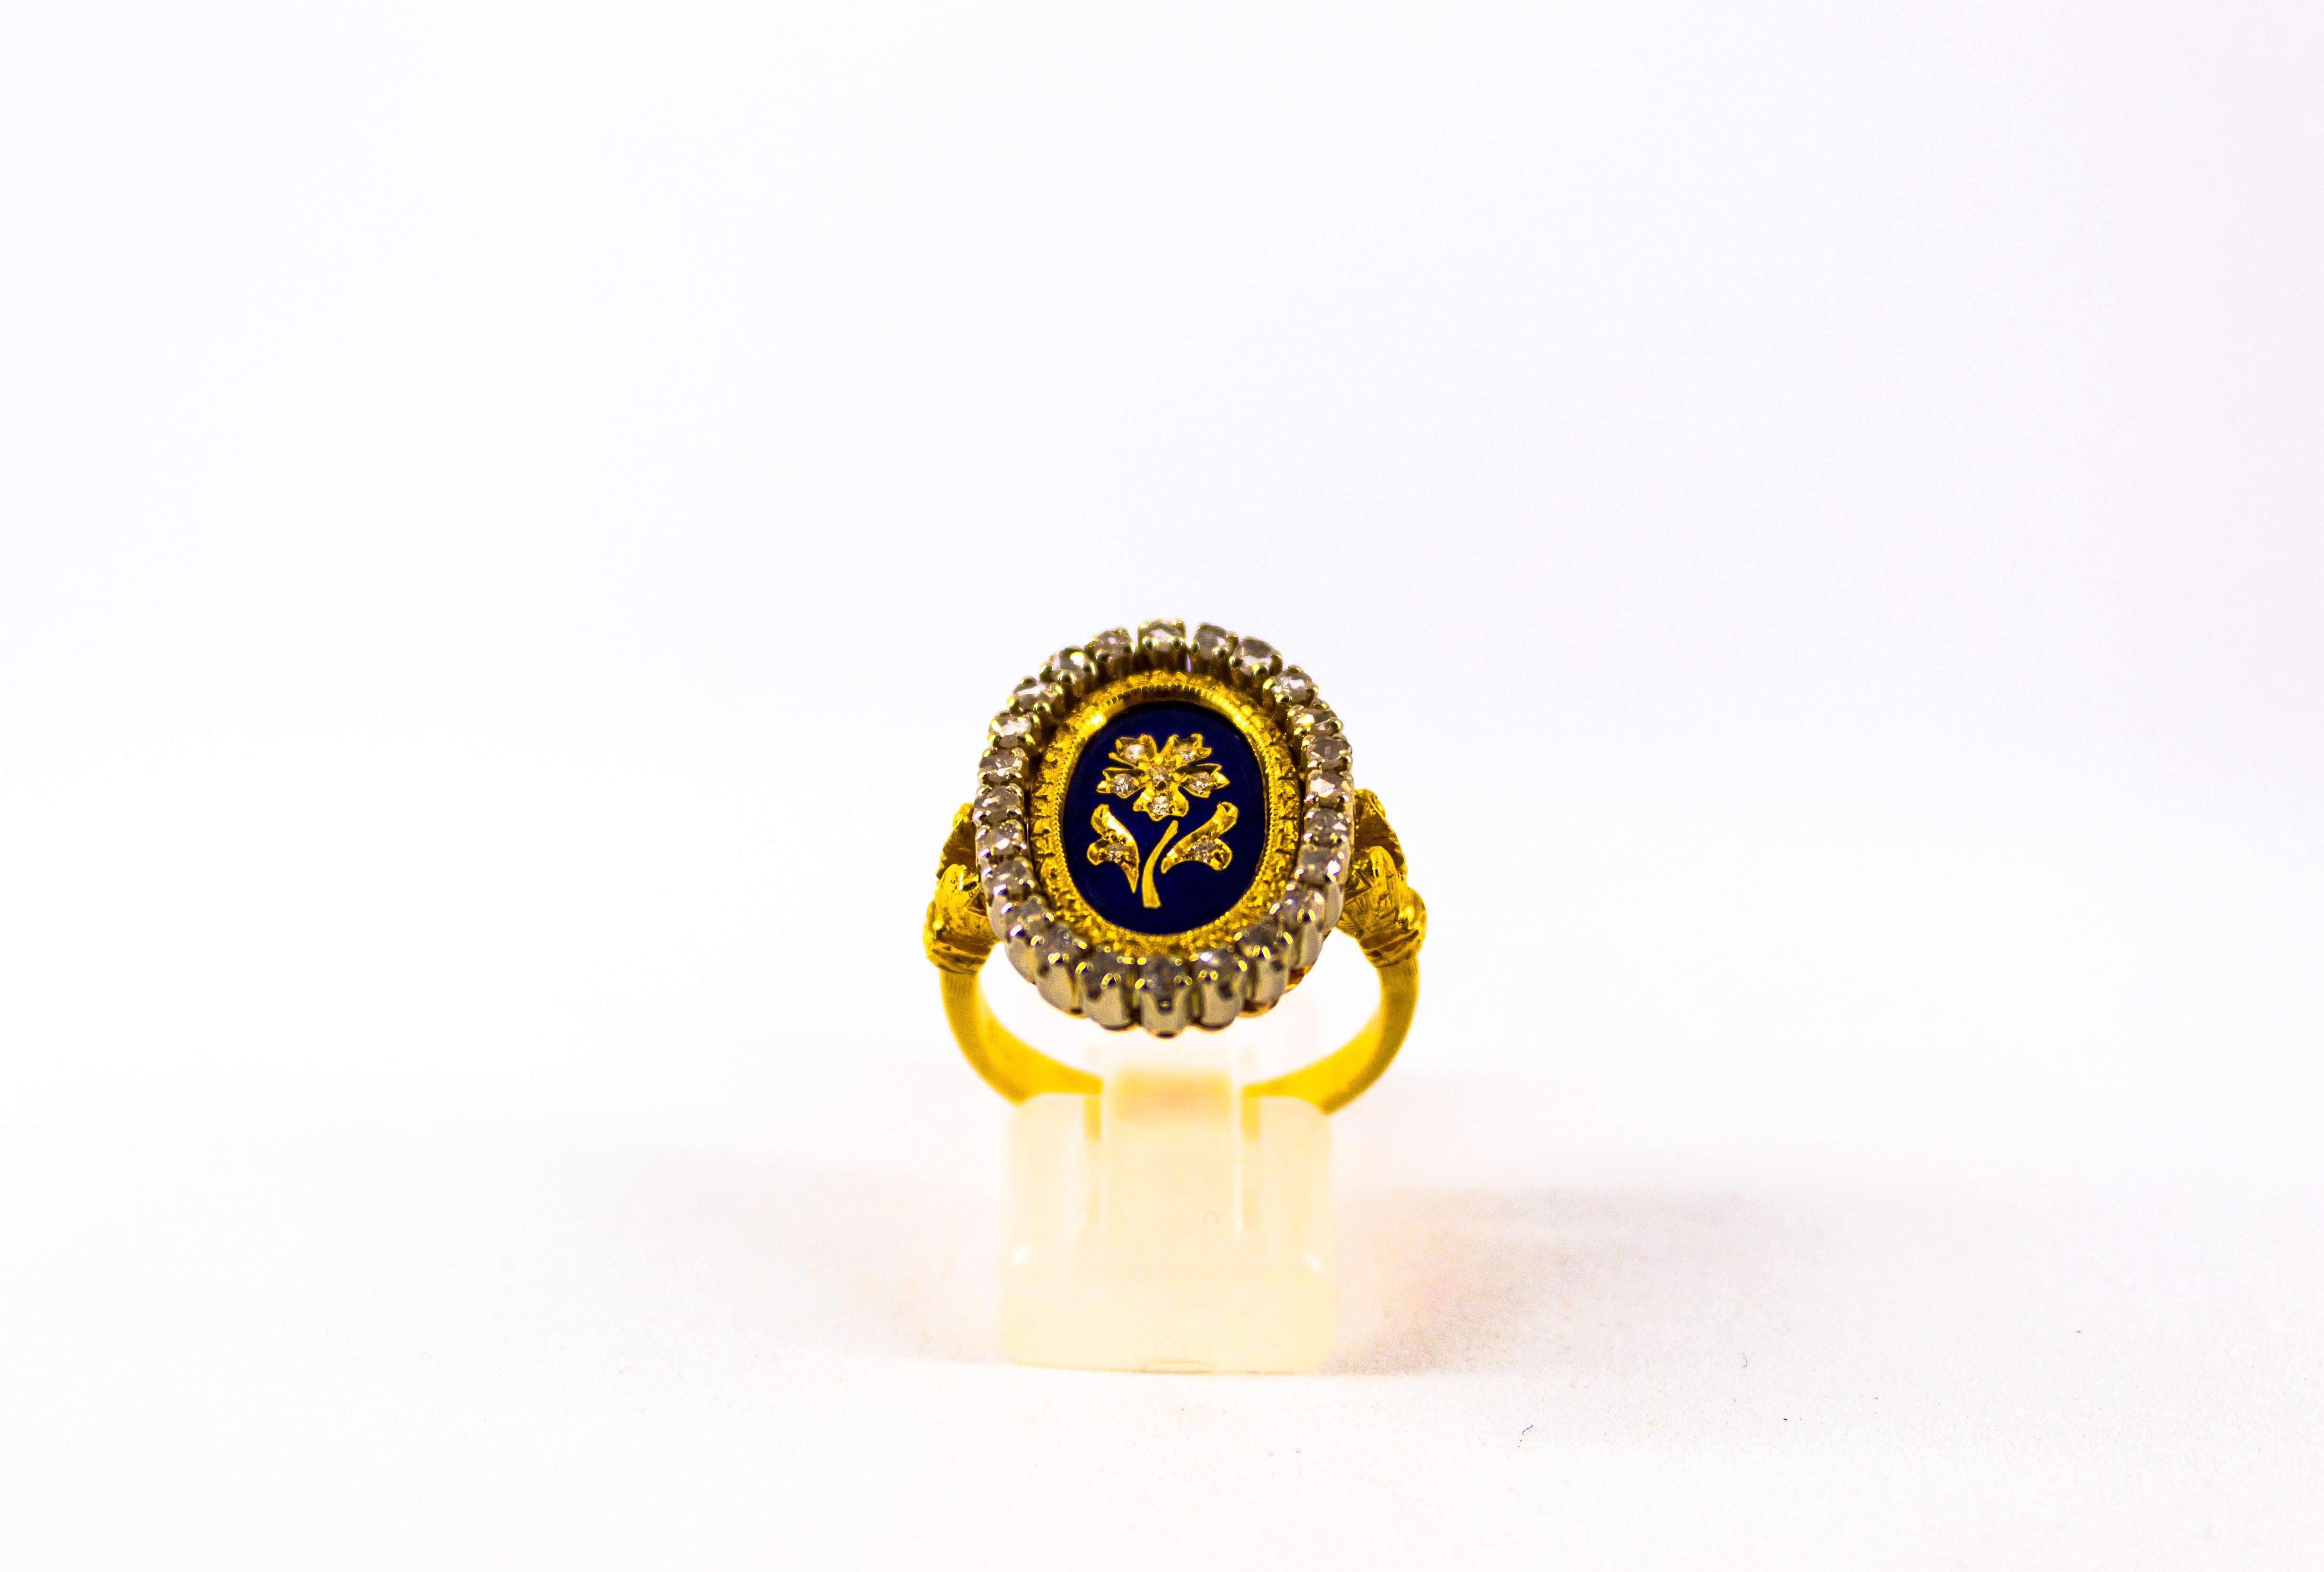 This Ring is made of 18K Yellow Gold.
This Ring has 0.80 Carats of White Diamonds.
This Ring has also Blue Enamel.
Size ITA: 15 USA: 7 1/4
This Ring is an antique Renaissance Style Ring from Florence, Italy. 
We're a workshop so every piece is